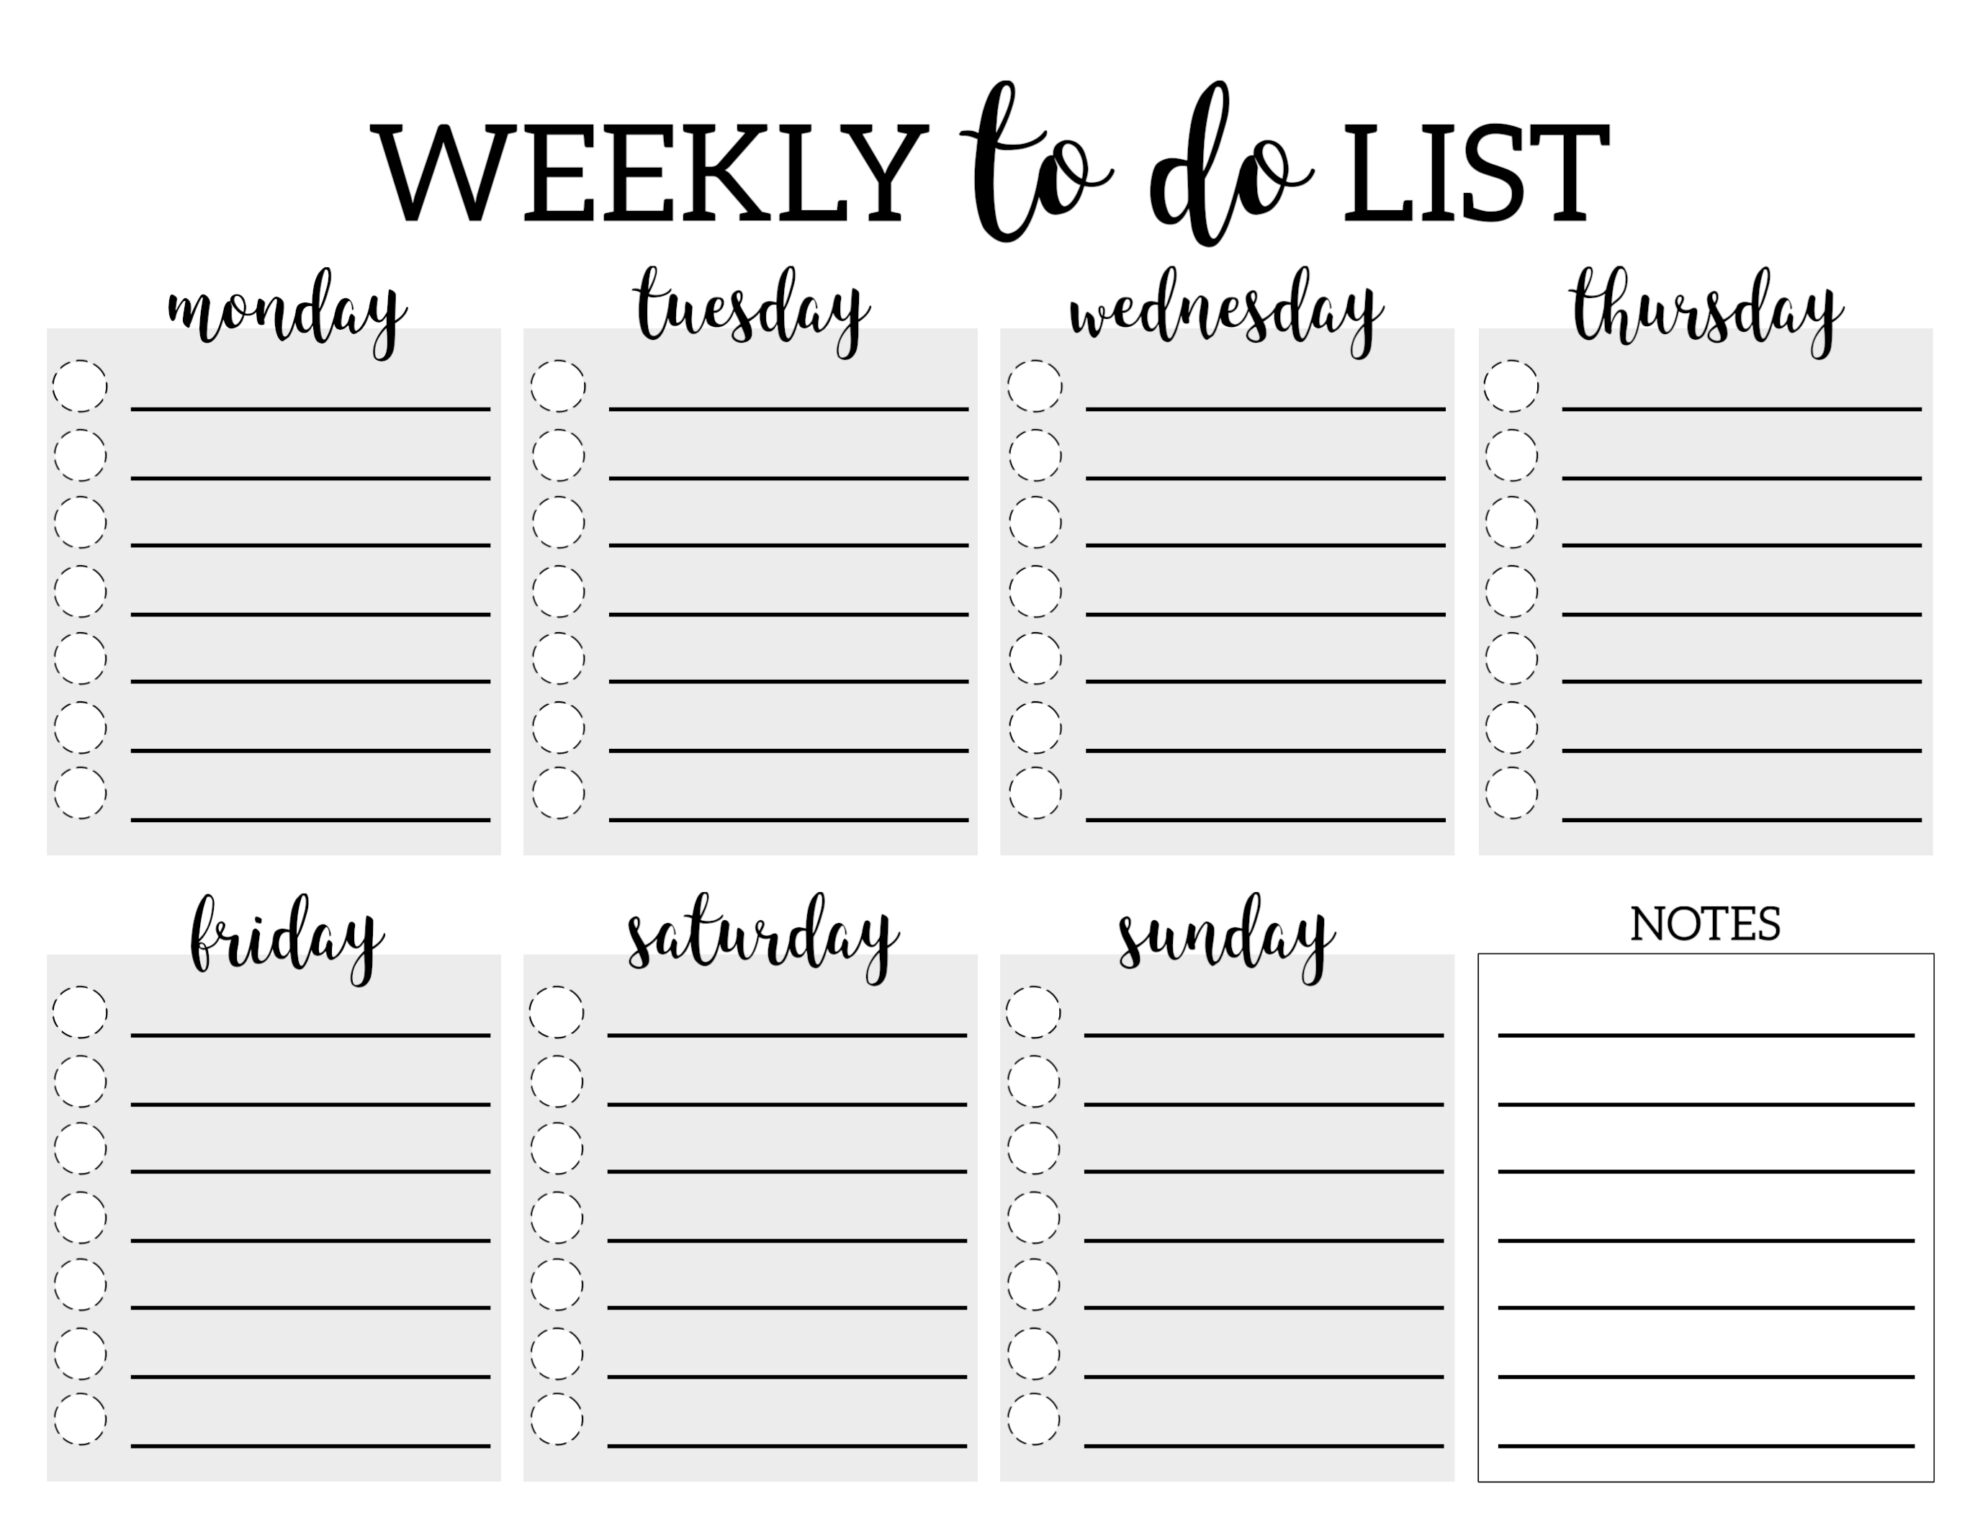 example of weekly checklist template